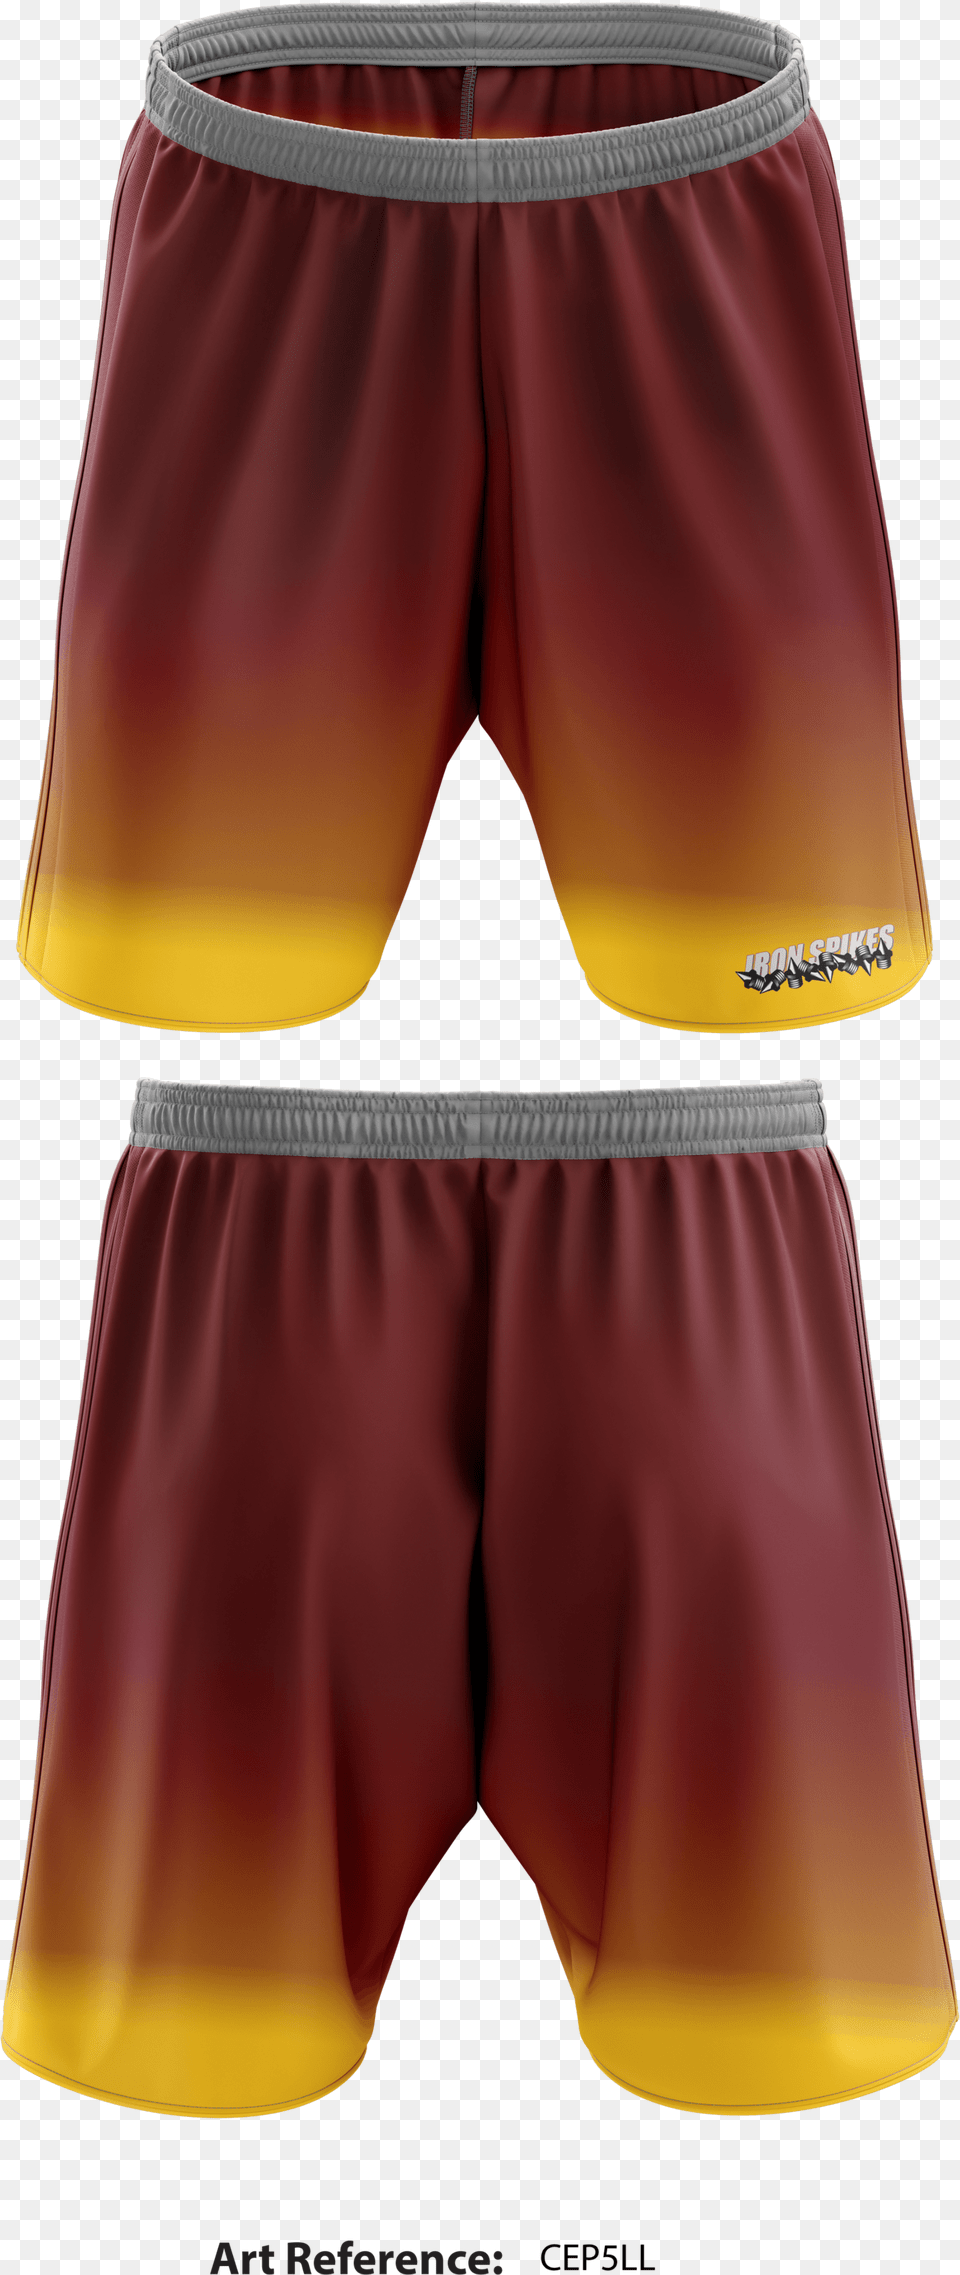 Iron Spikes Track And Field Club Athletic Shorts Underpants, Clothing, Swimming Trunks Png Image